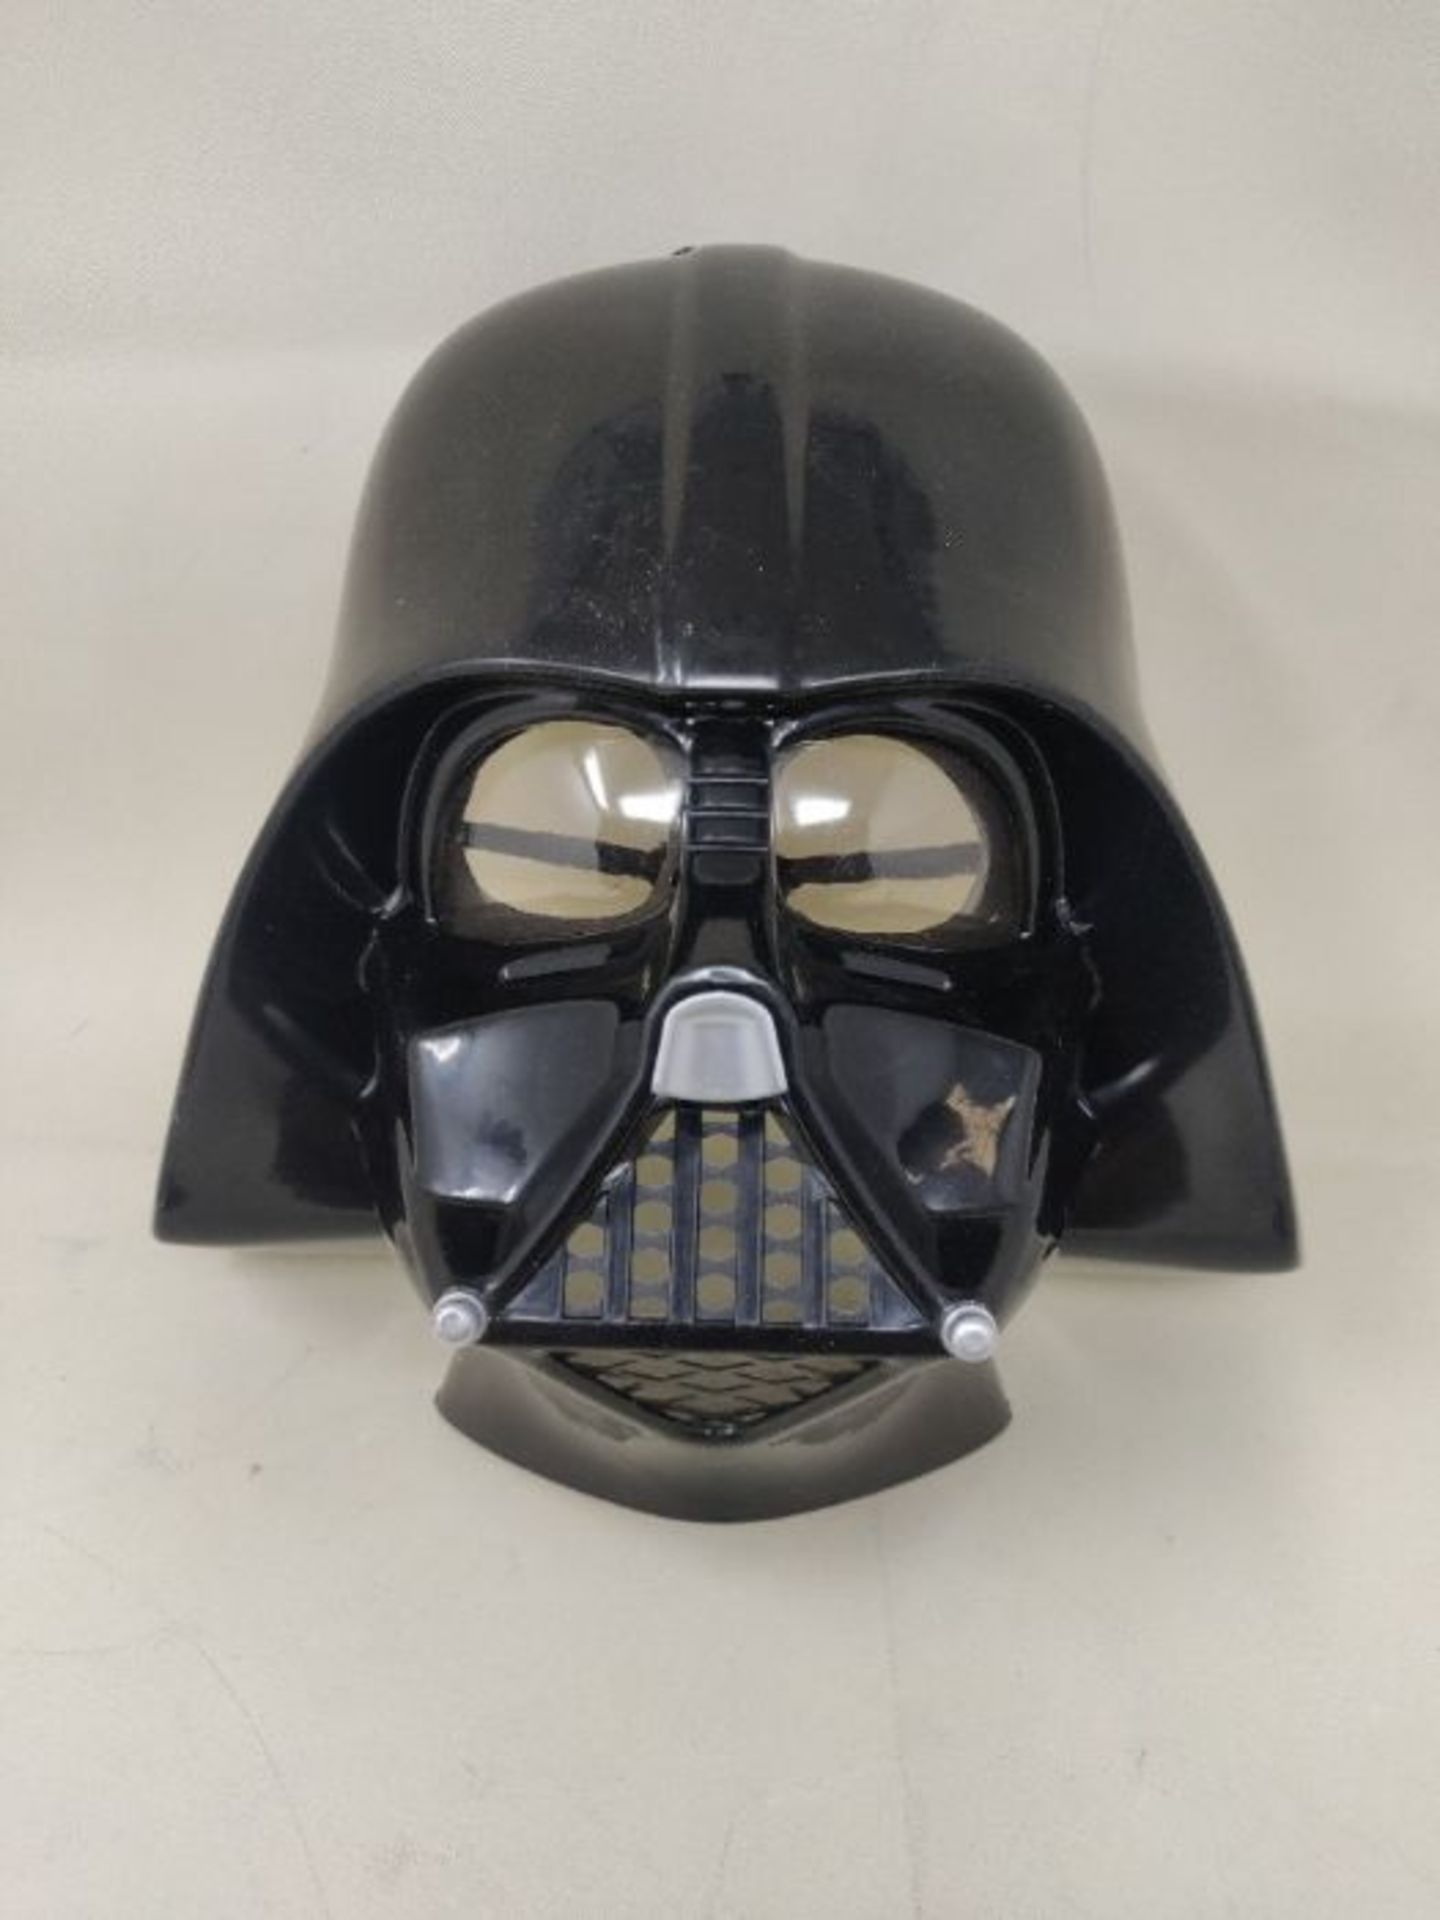 Rubie's Official Child's Disney Star Wars Darth Vader Mask Costume - One Size - Image 2 of 2